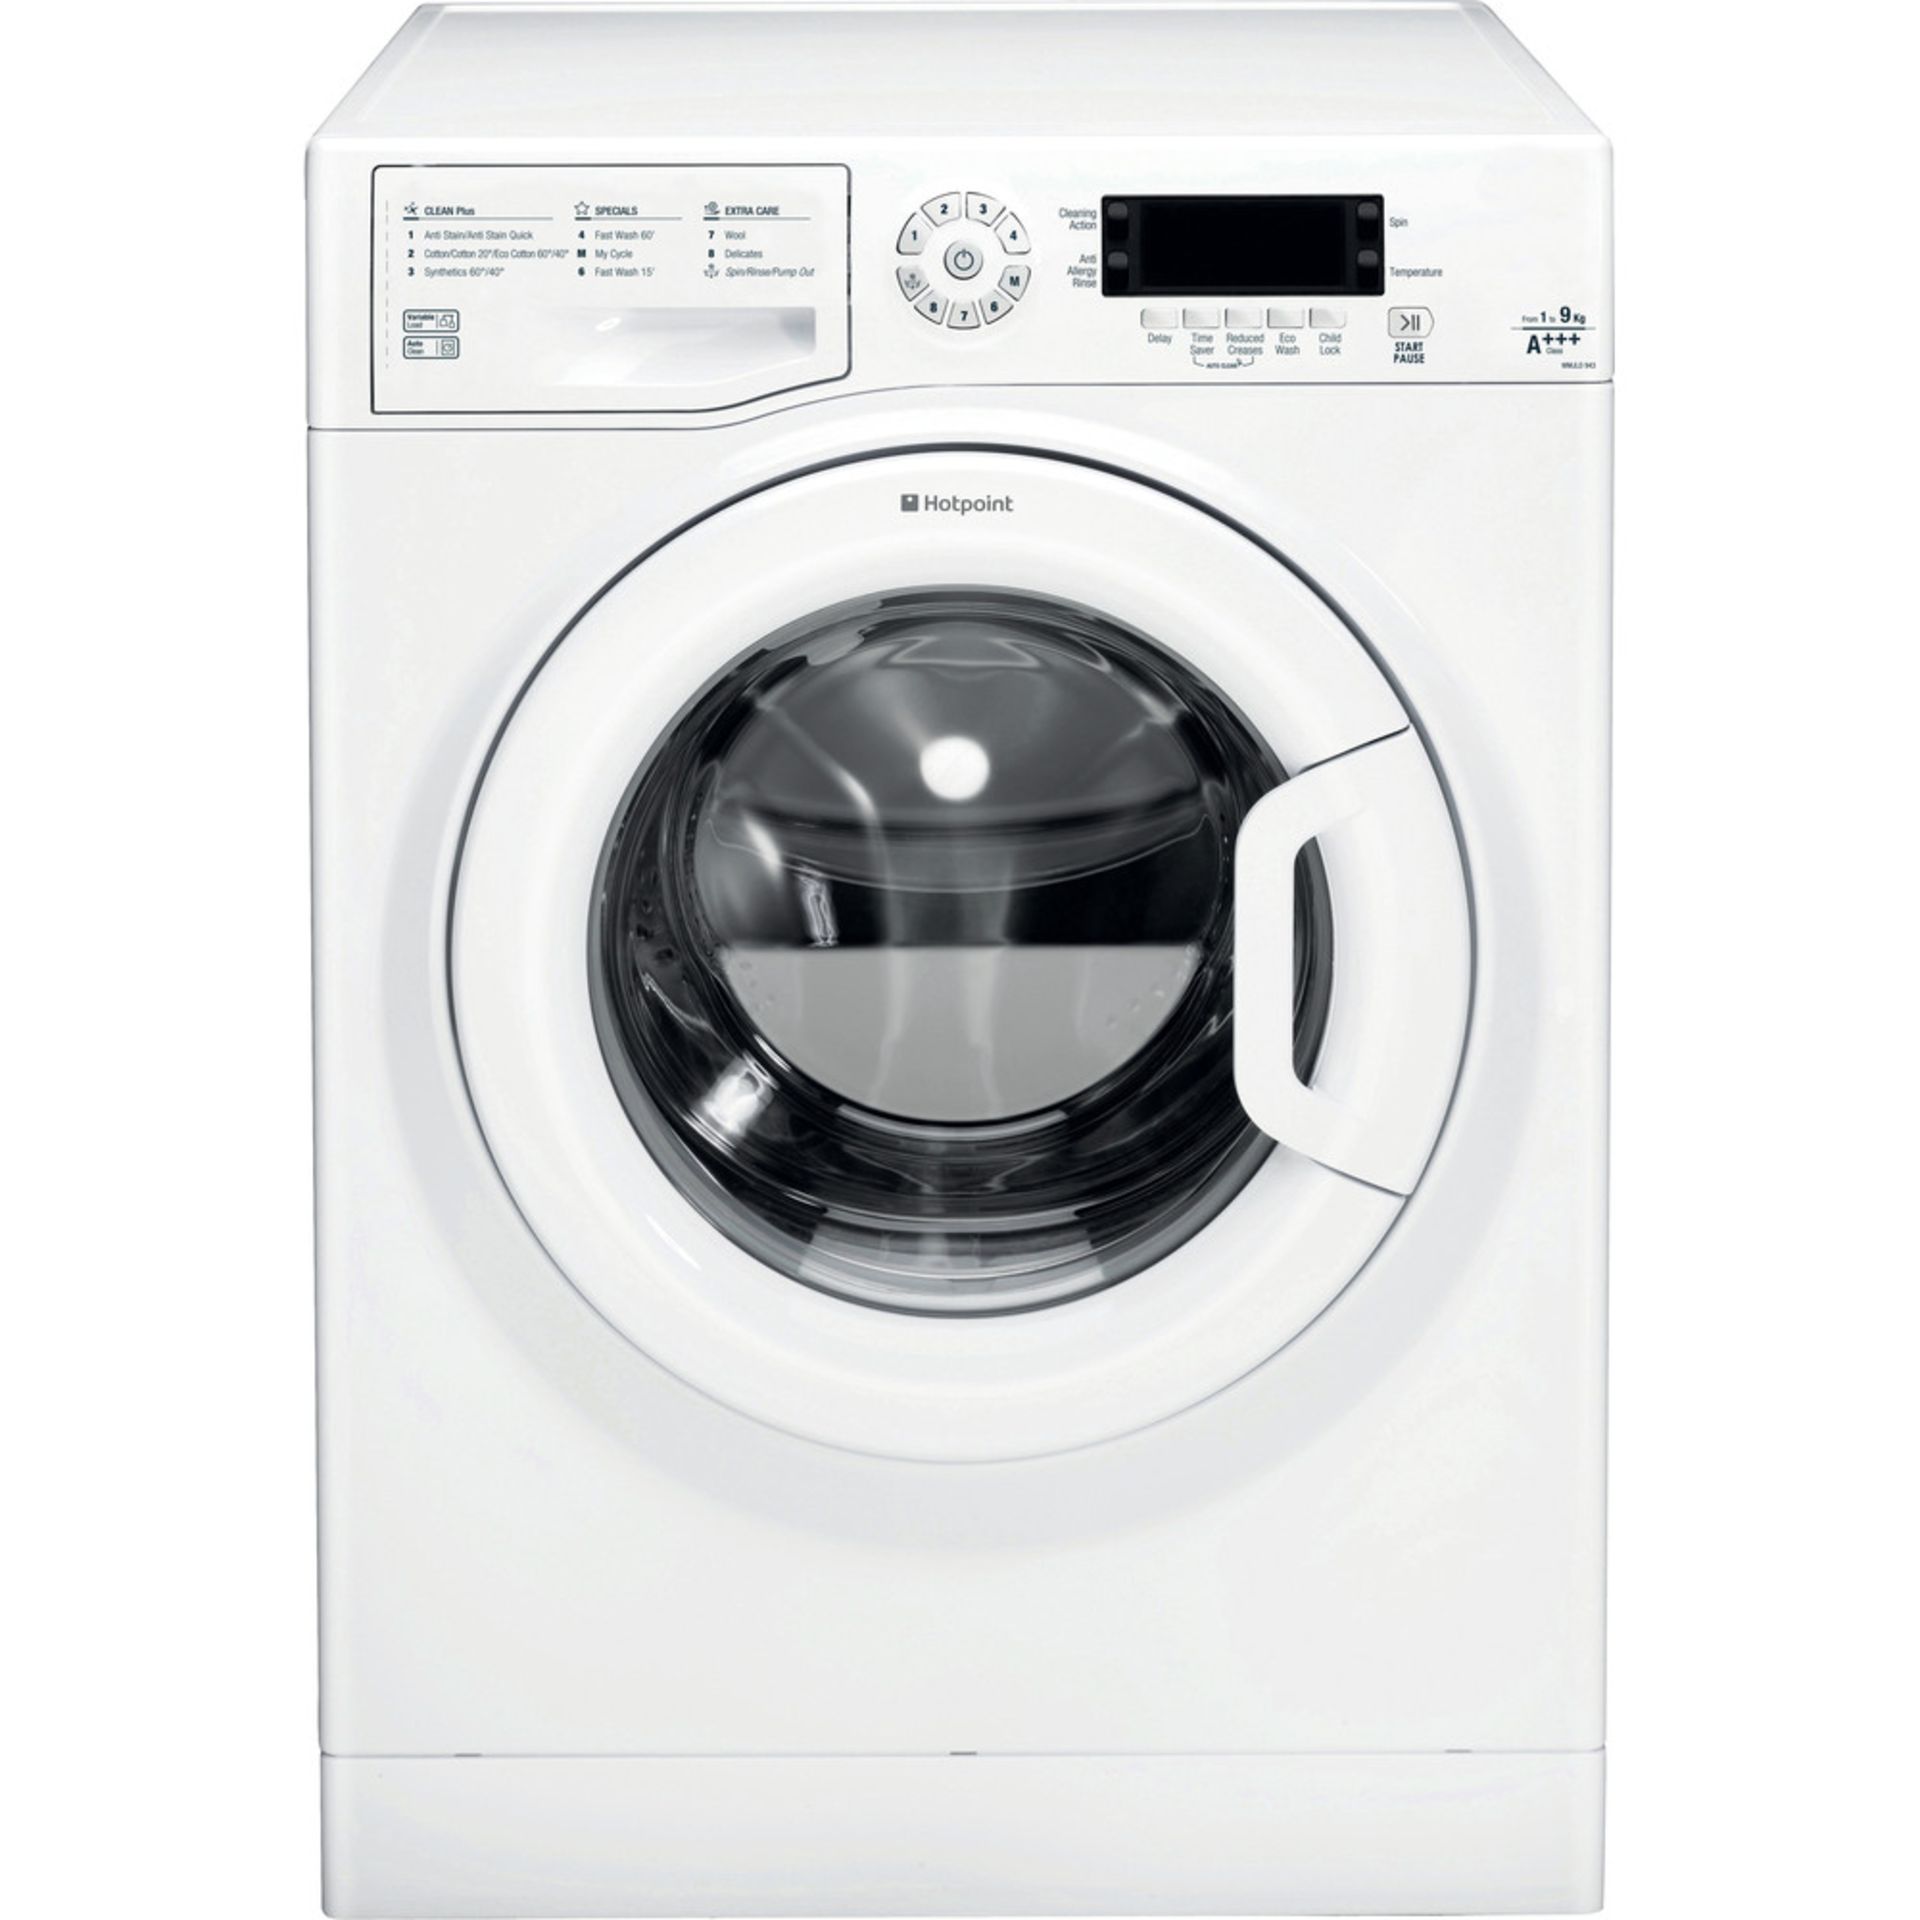 Category - RETURNED WHITE GOODS - Hotpoint WMJLD 943 P Freestanding Washing Machine - T002936756